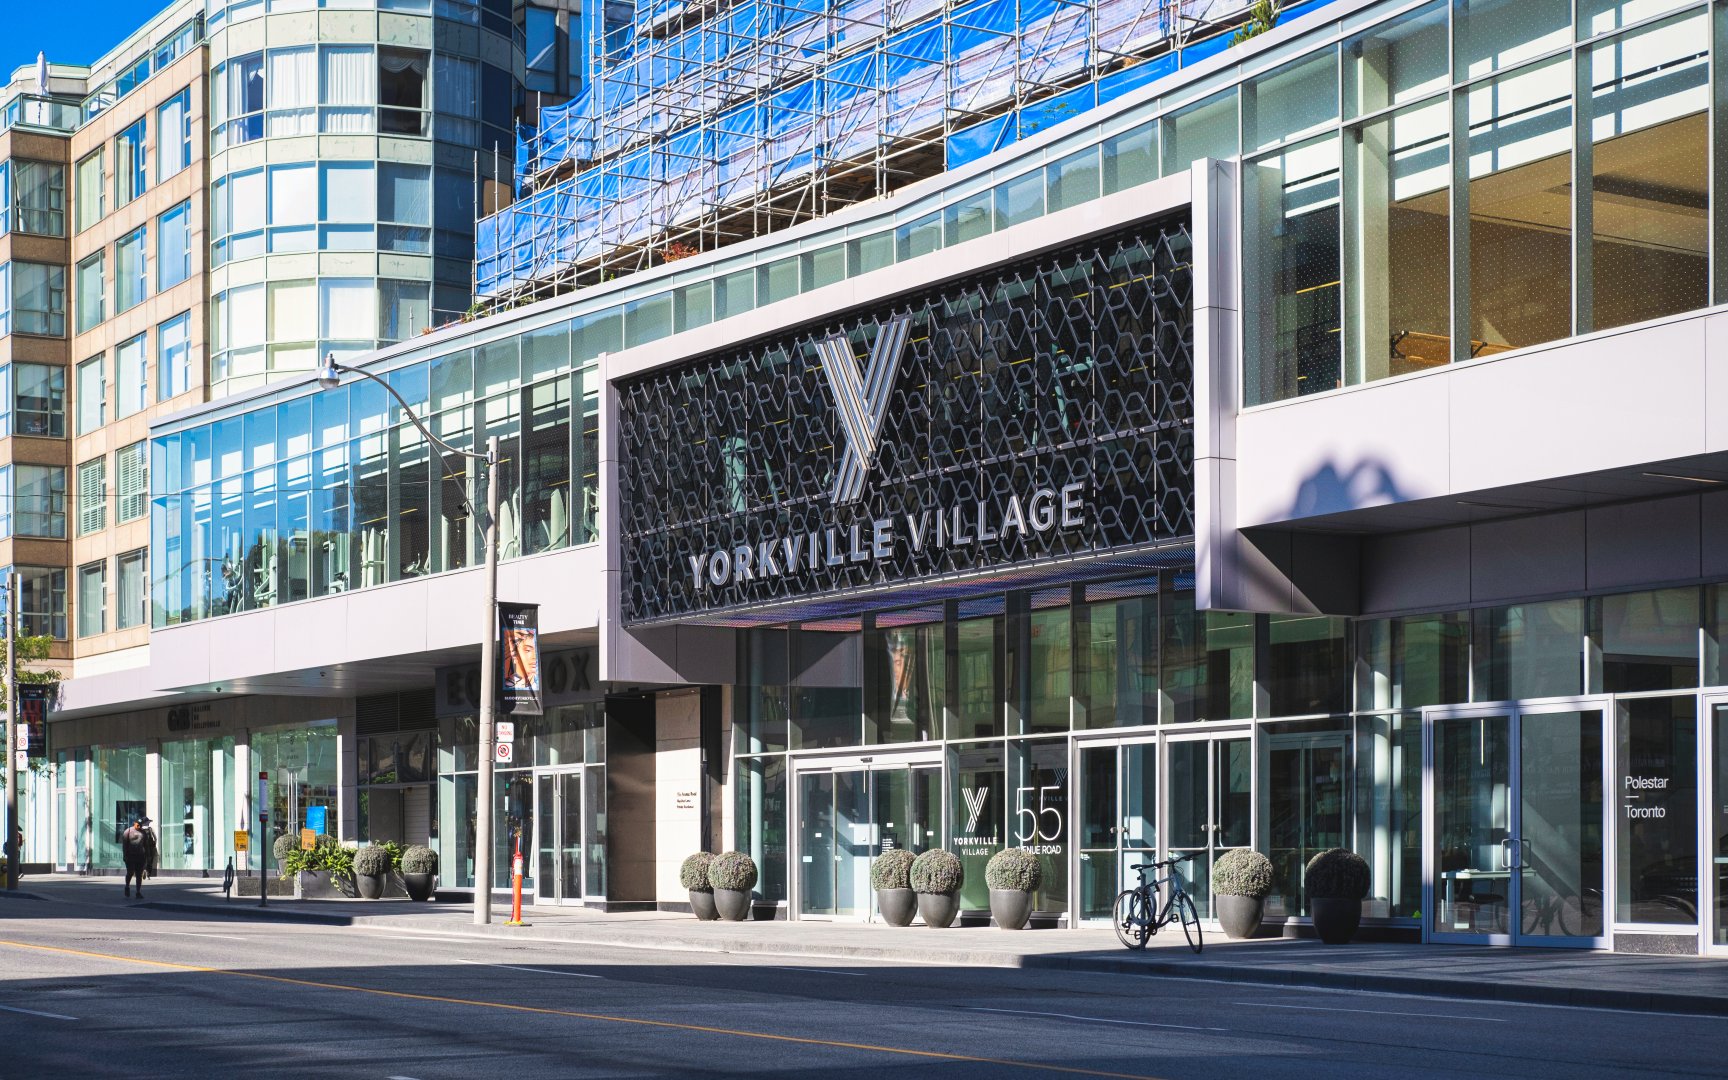 Yorkville Village (c) Photo by SHANE Maps exclusively for SHANE Maps